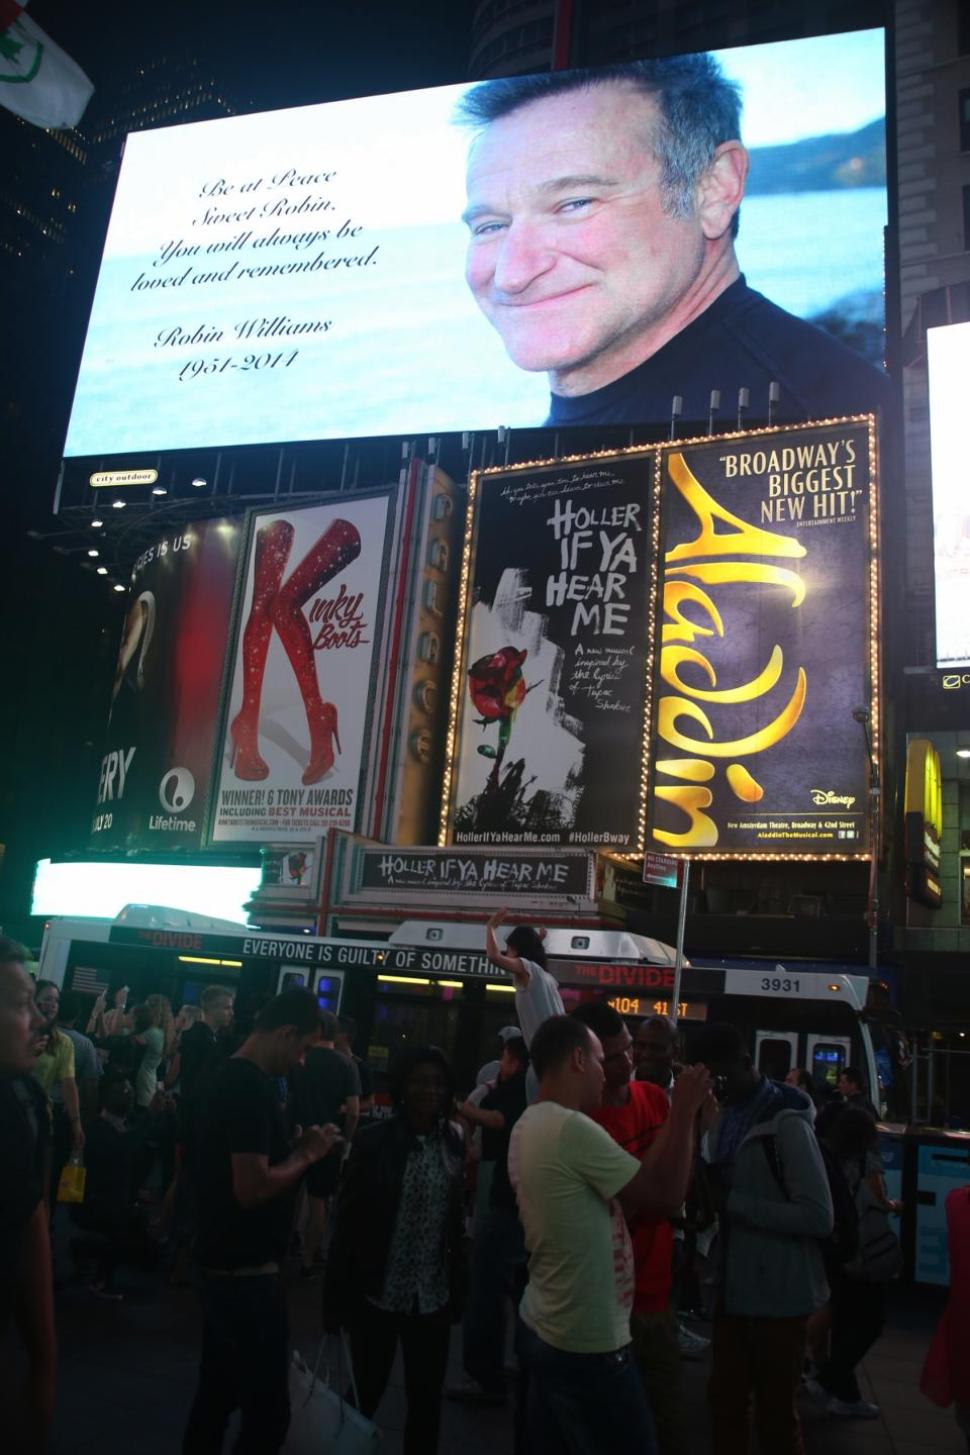 Times Square pays tribute to Robin Williams as Broadway dims the lights to honor his life and career.